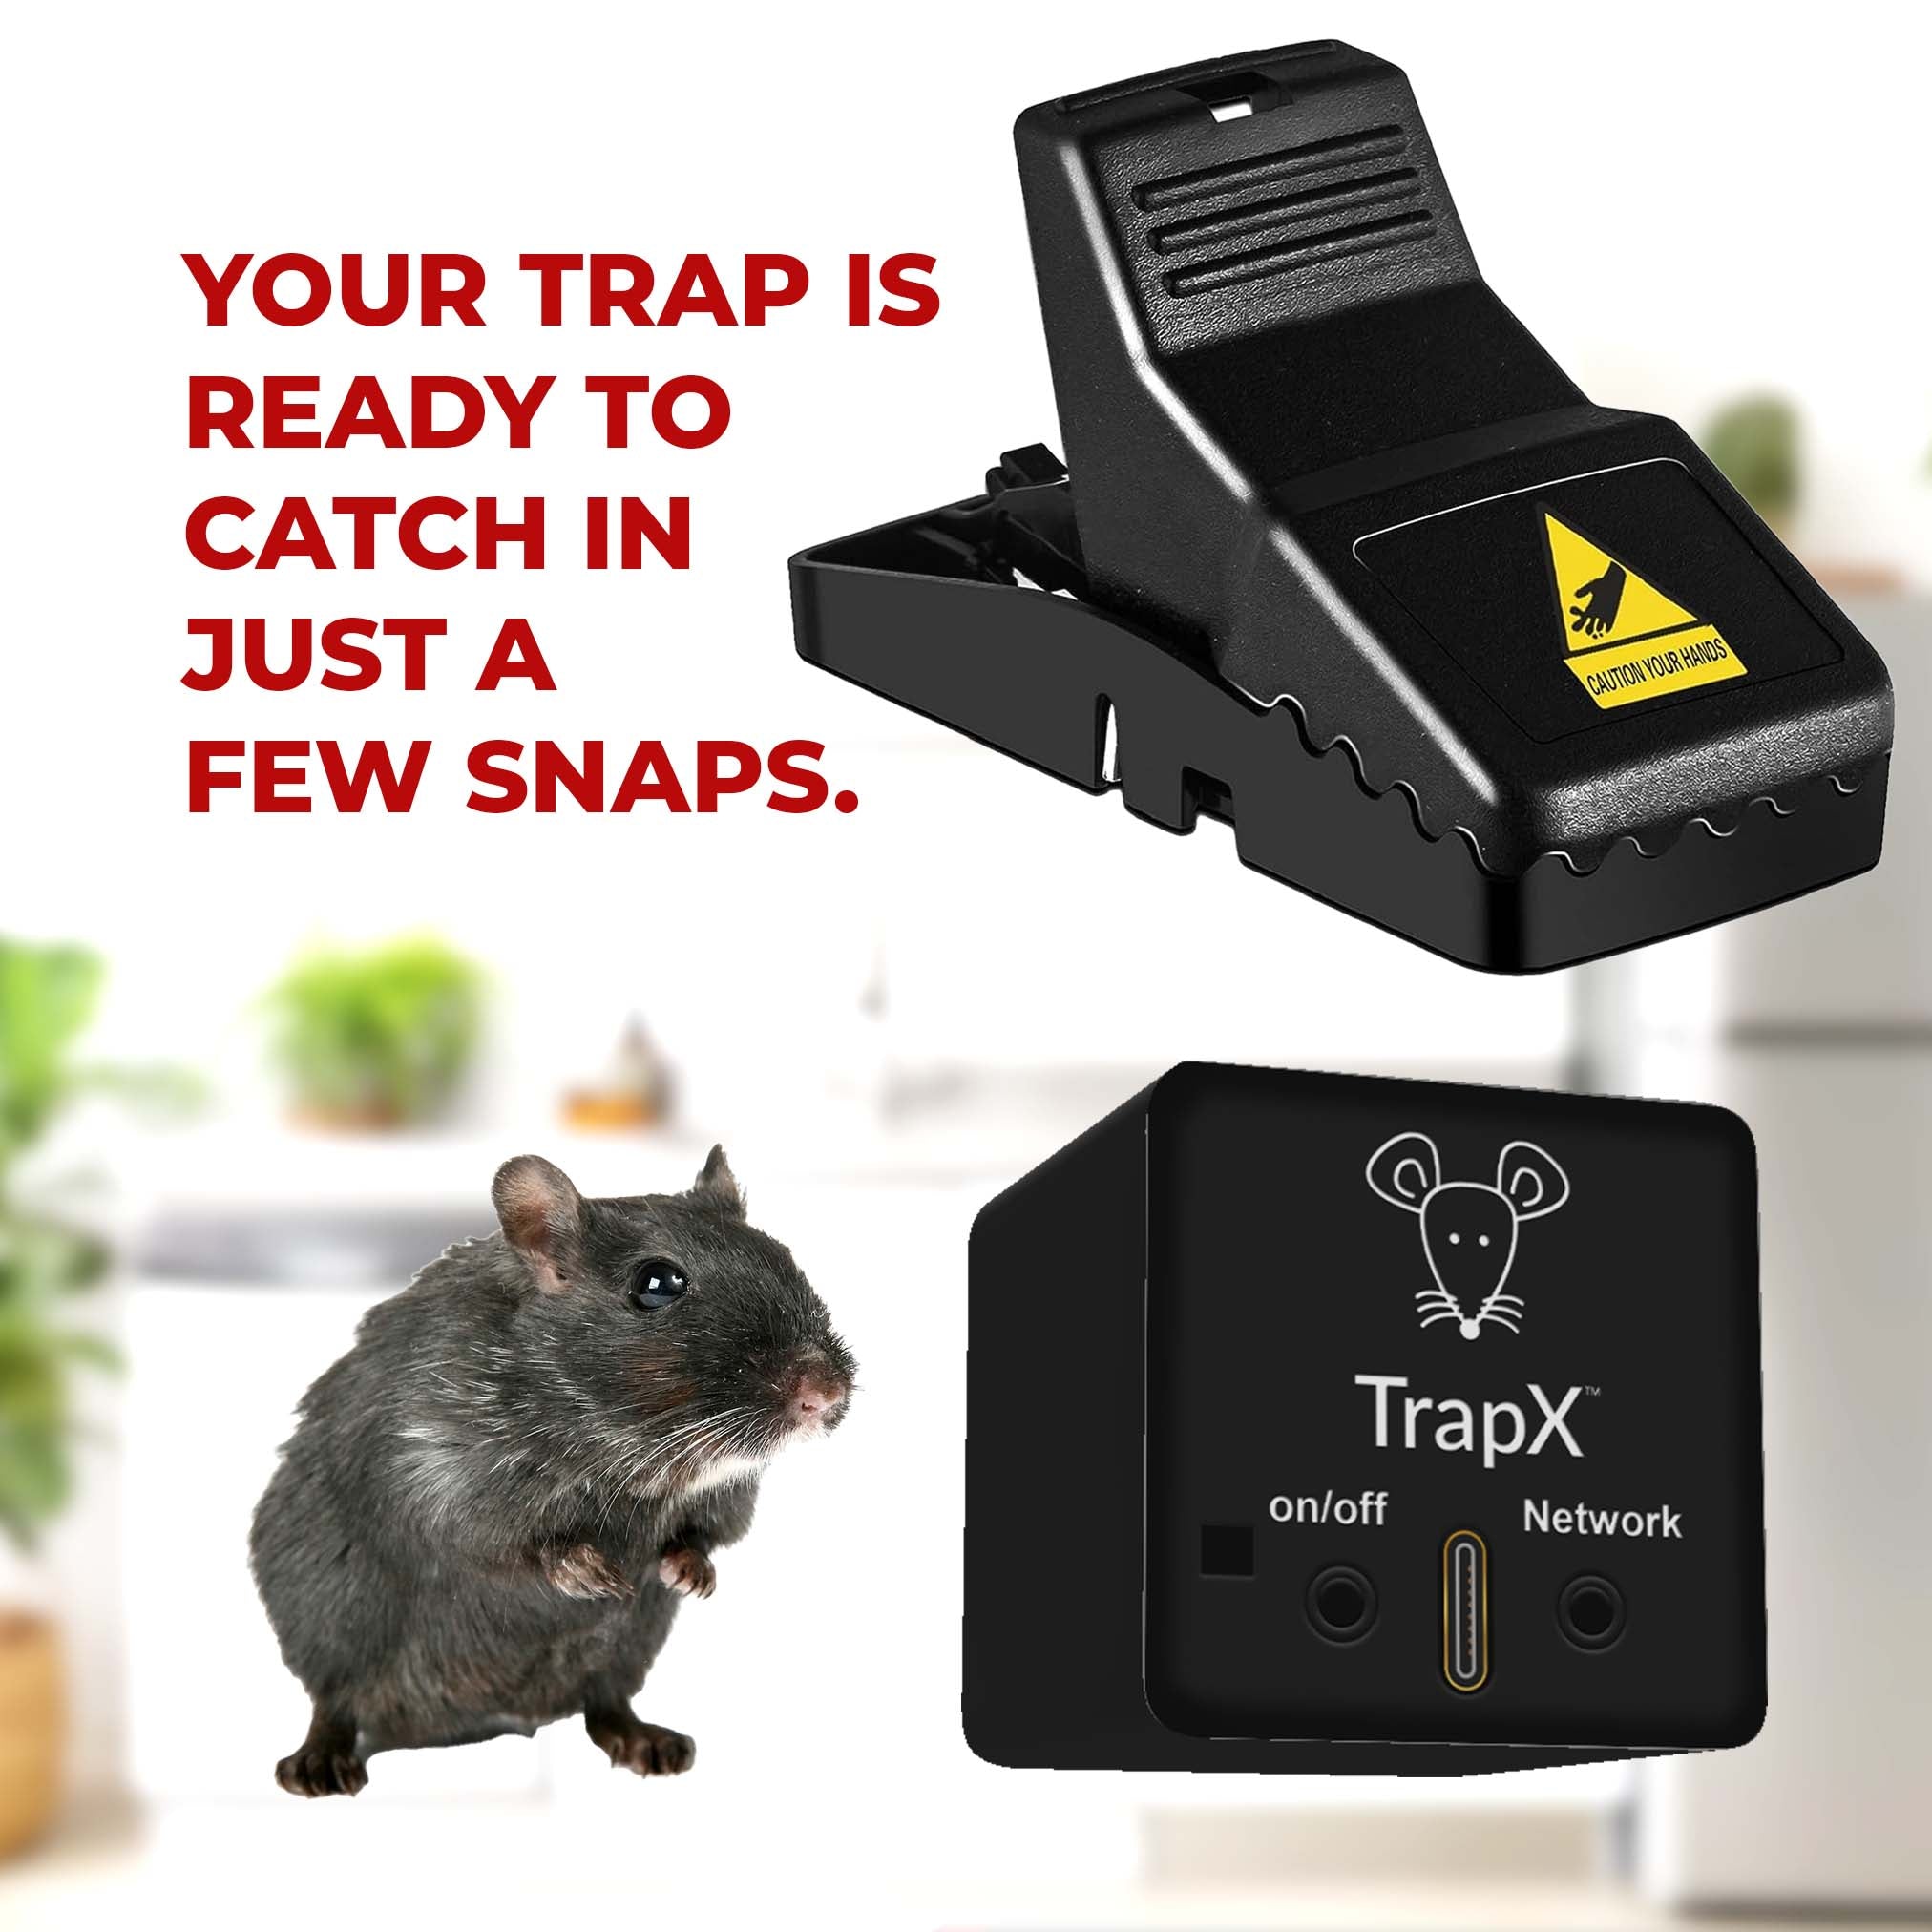 Is TrapX Mice Gel Safe to Use Around Pets?